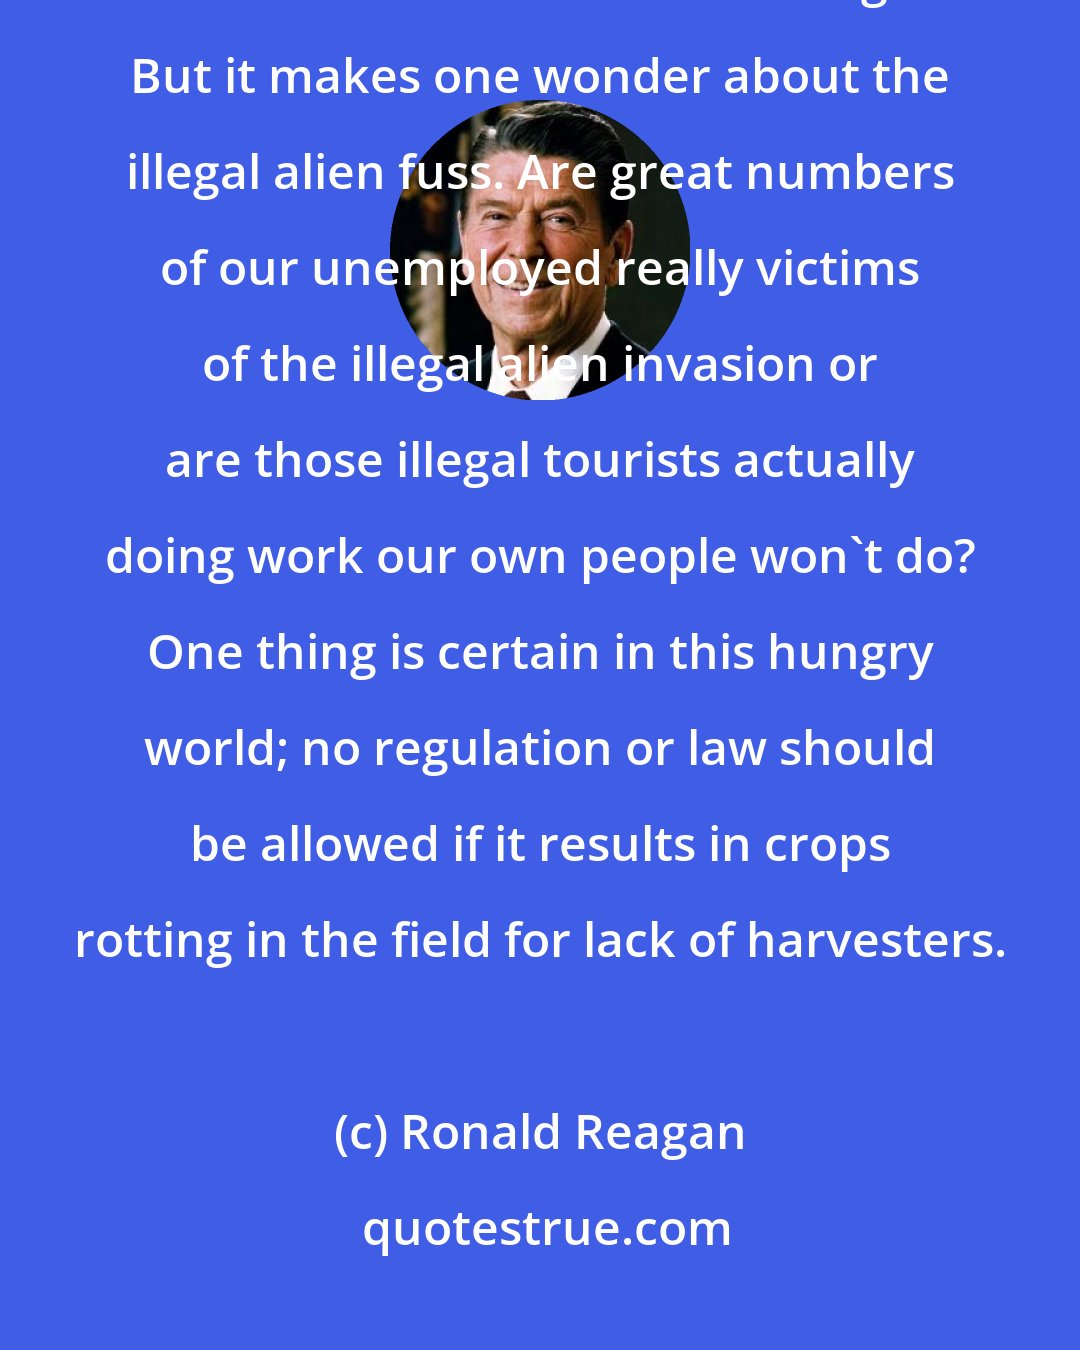 Ronald Reagan: When the Labor Department is forced to relent and let these visitors do this work it is of course all legal. But it makes one wonder about the illegal alien fuss. Are great numbers of our unemployed really victims of the illegal alien invasion or are those illegal tourists actually doing work our own people won't do? One thing is certain in this hungry world; no regulation or law should be allowed if it results in crops rotting in the field for lack of harvesters.